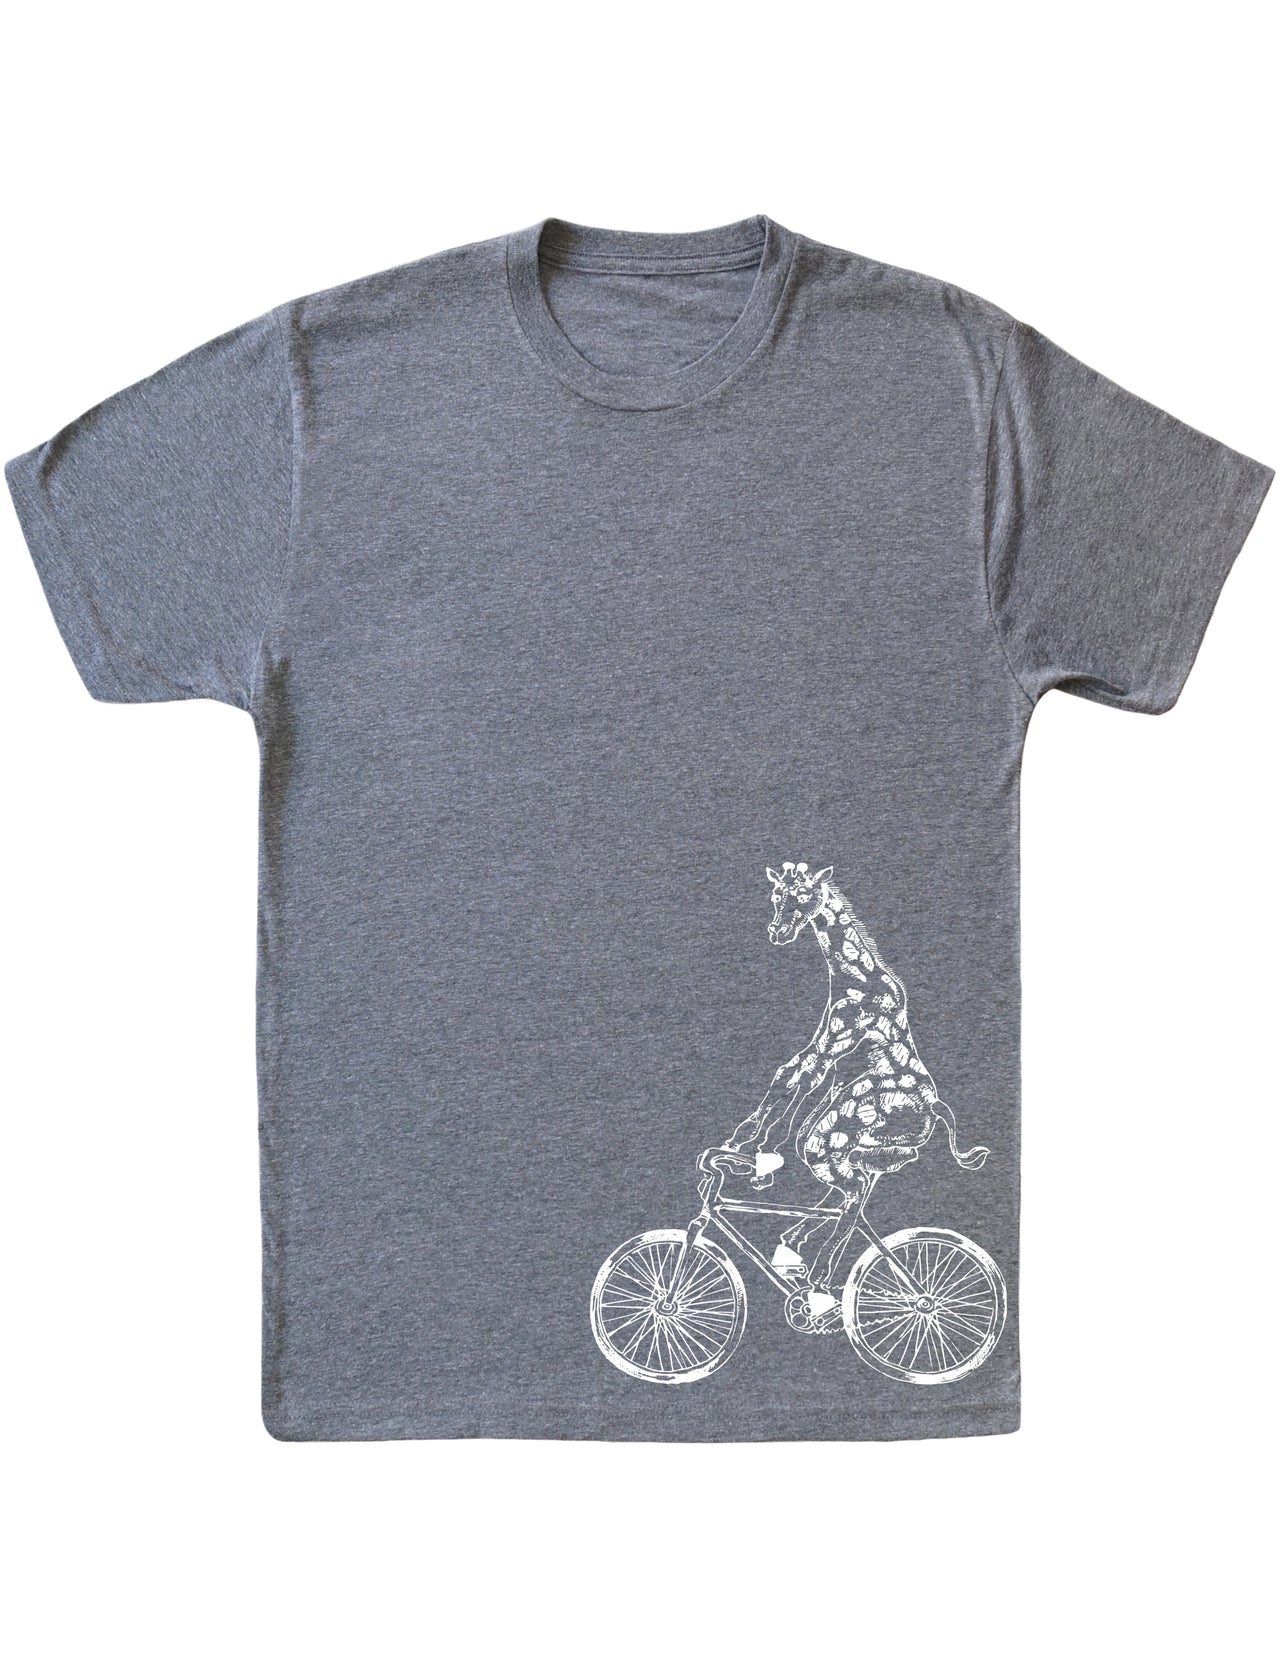 seembo-giraffe-cycling-bicycle-bike-design-on-it-vintage-grey-t-shirt-ptinted-on-side